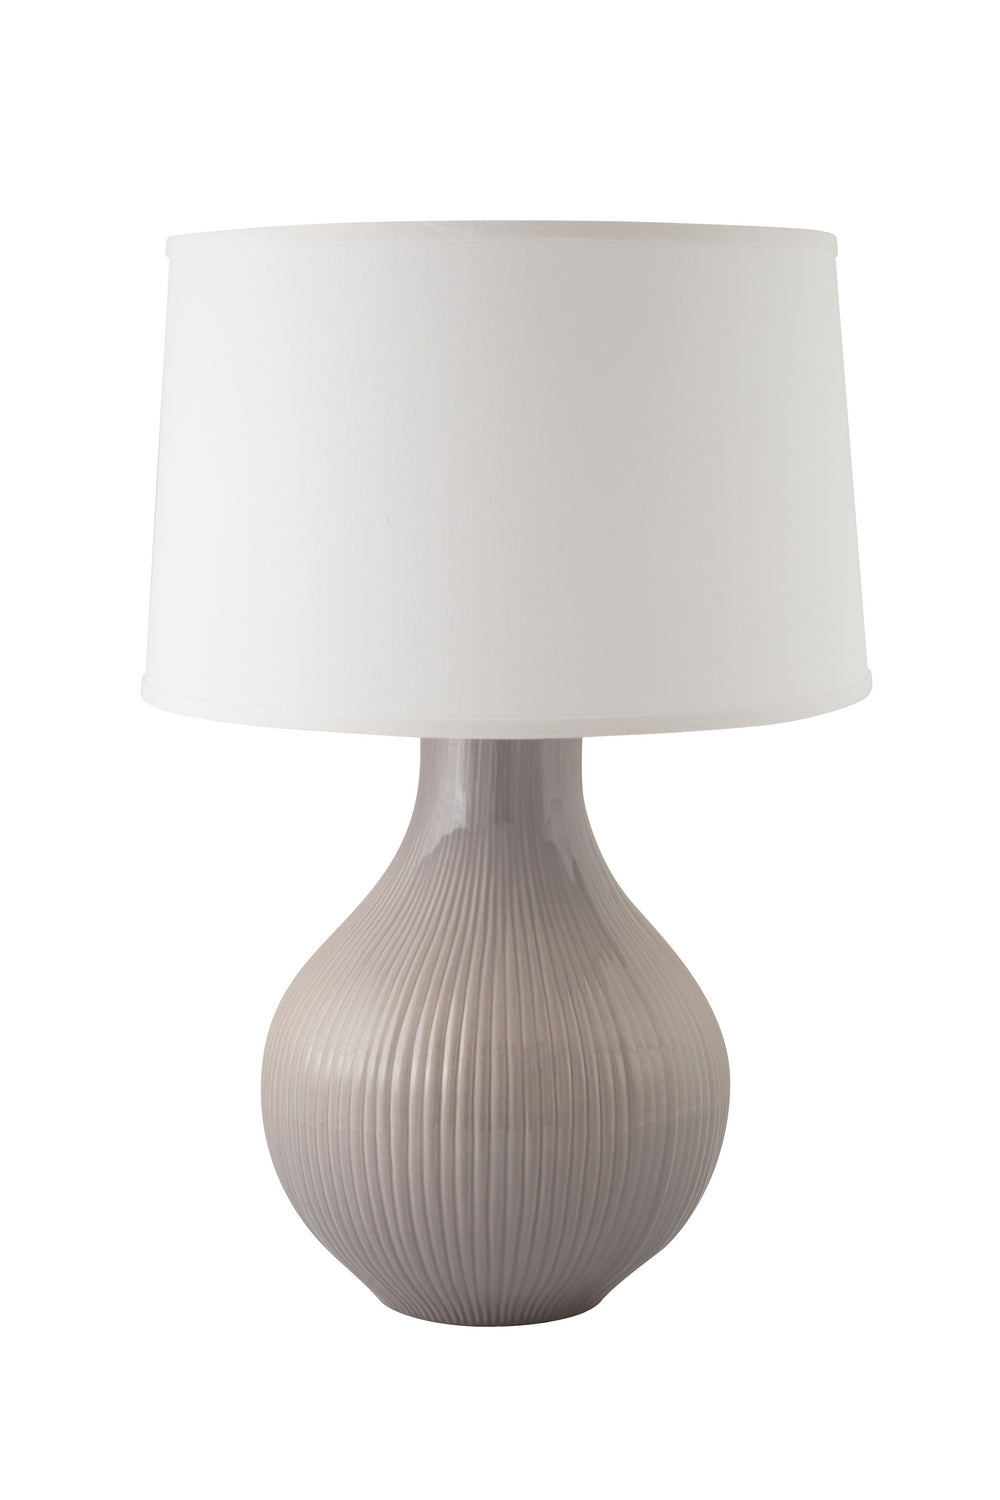 River Ceramic Lighting 270-10 Classic Fluted One Light Table Lamp Lamp Gray